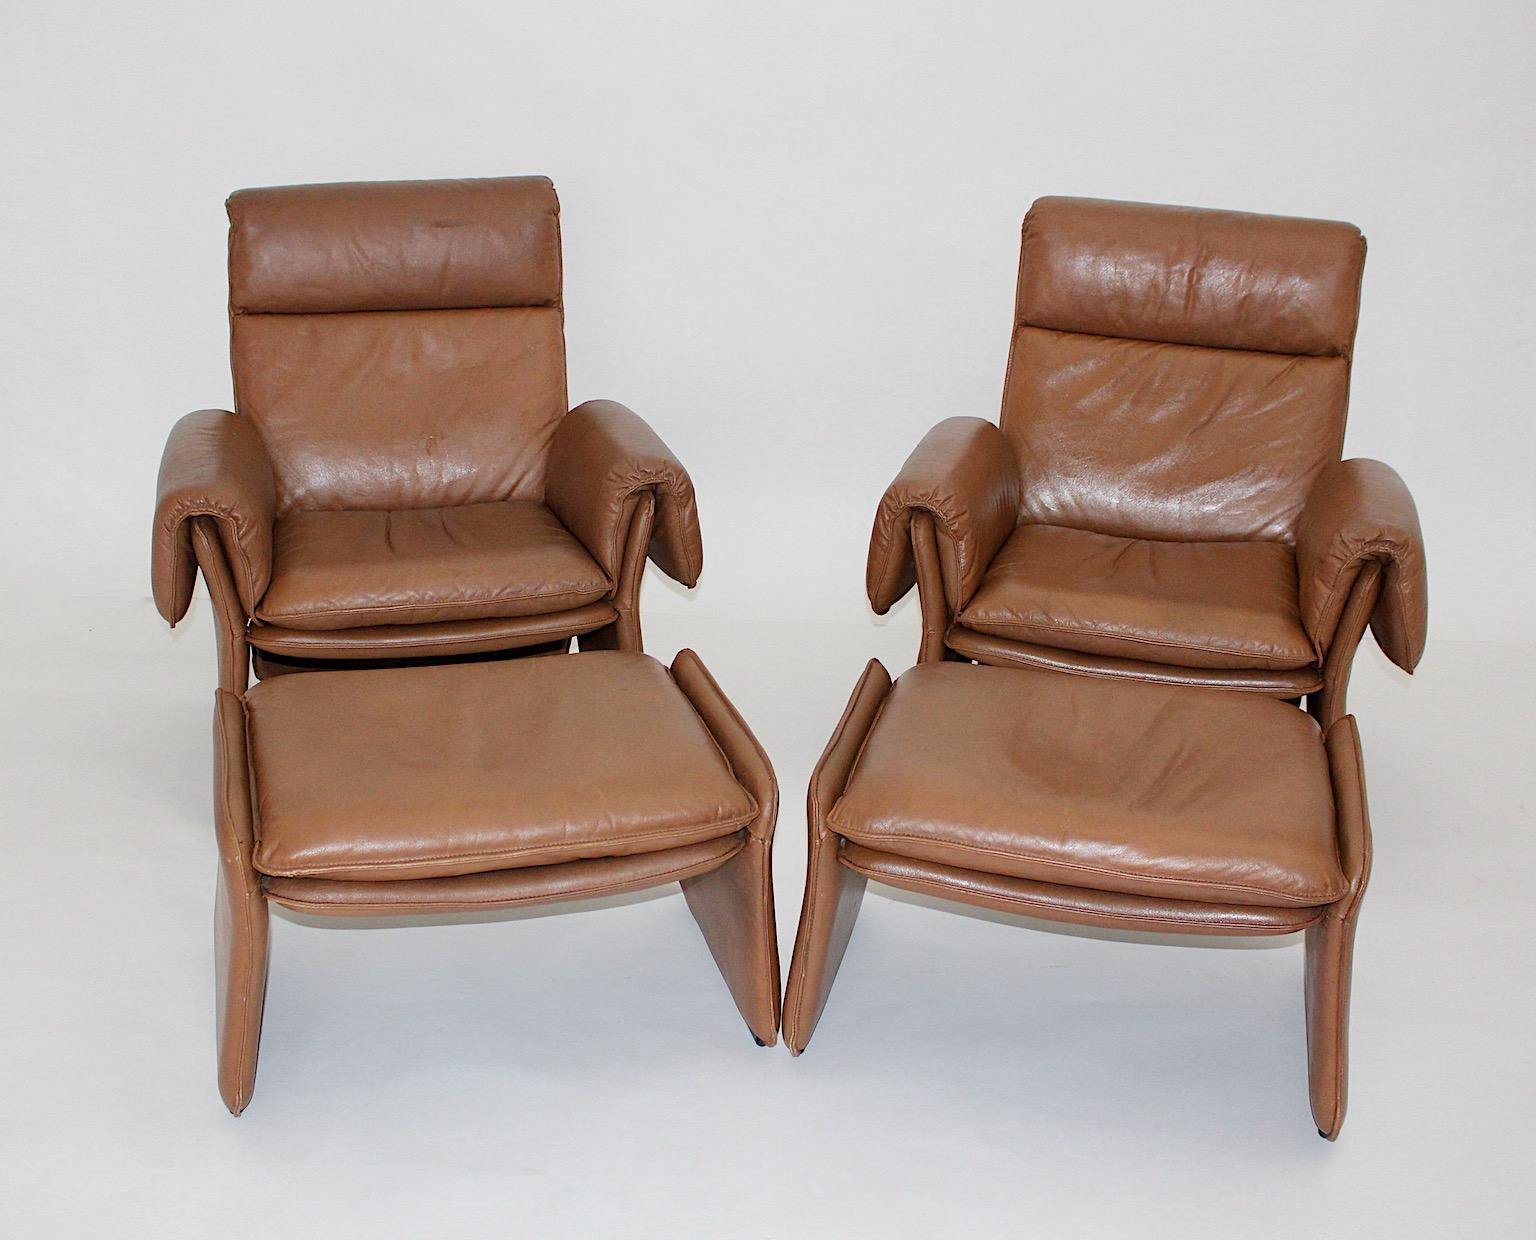 Mid-Century Modern vintage pair of lounge chairs or armchairs with ottoman from patinated treated leather in a warm caramel brown color tone.
The lounge chairs look similar to de Sede and were designed and manufactured 1960s Italy.
The surface is